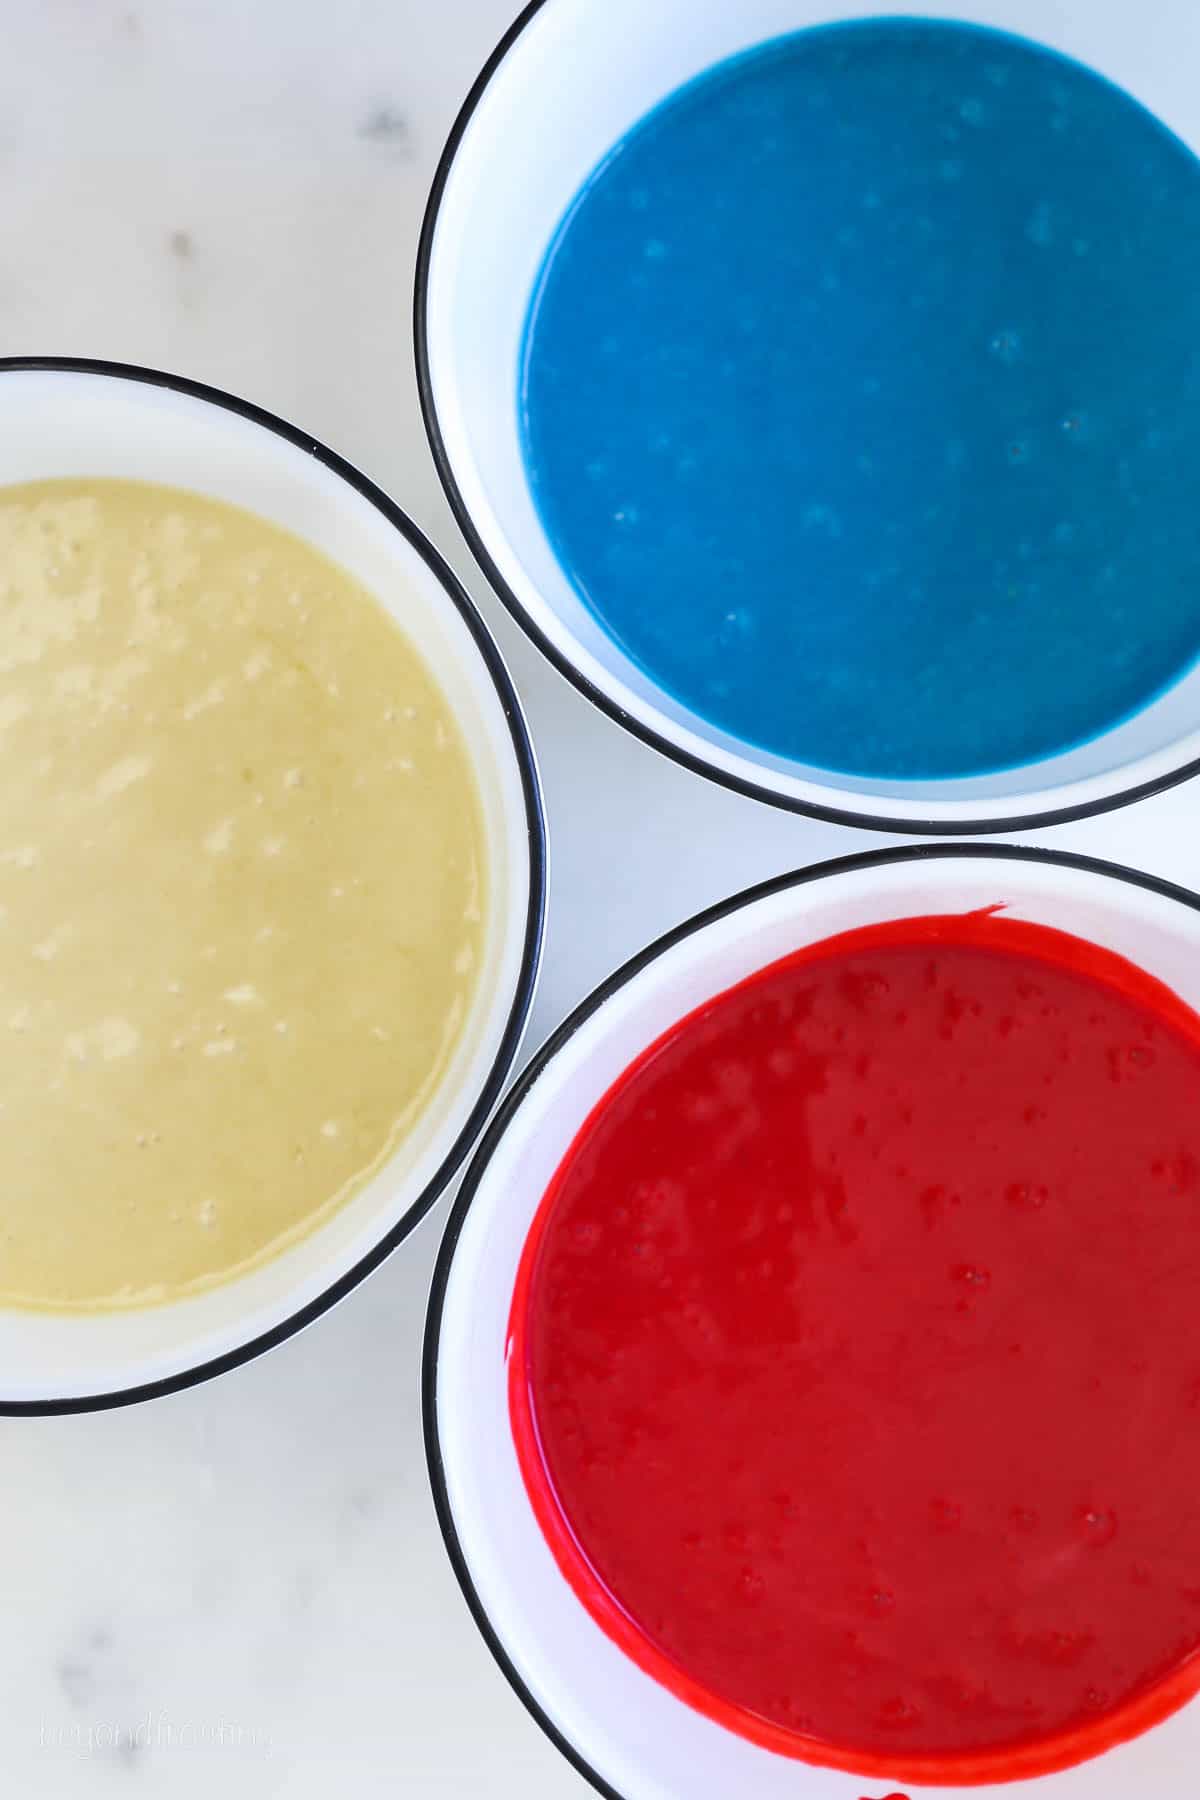 three bowls of cake batter, one is white, one is blue and one is red